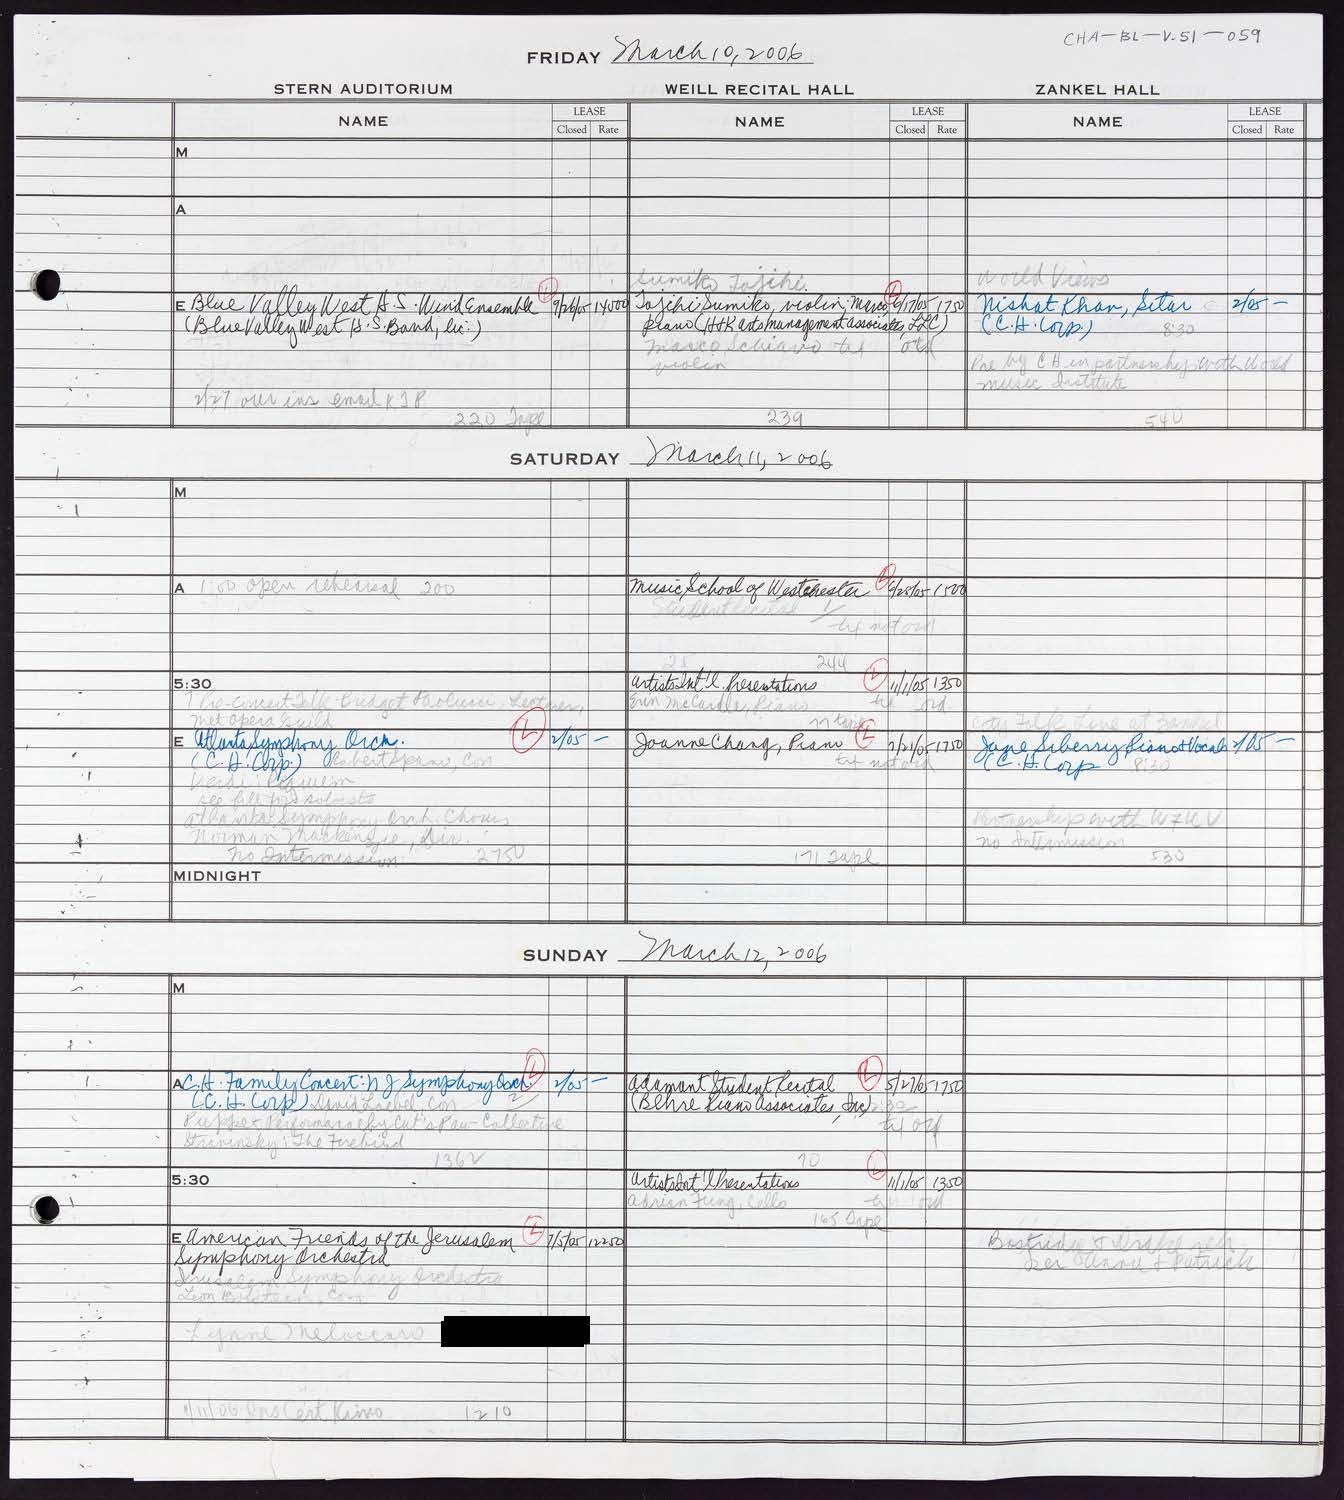 Carnegie Hall Booking Ledger, volume 51, page 59